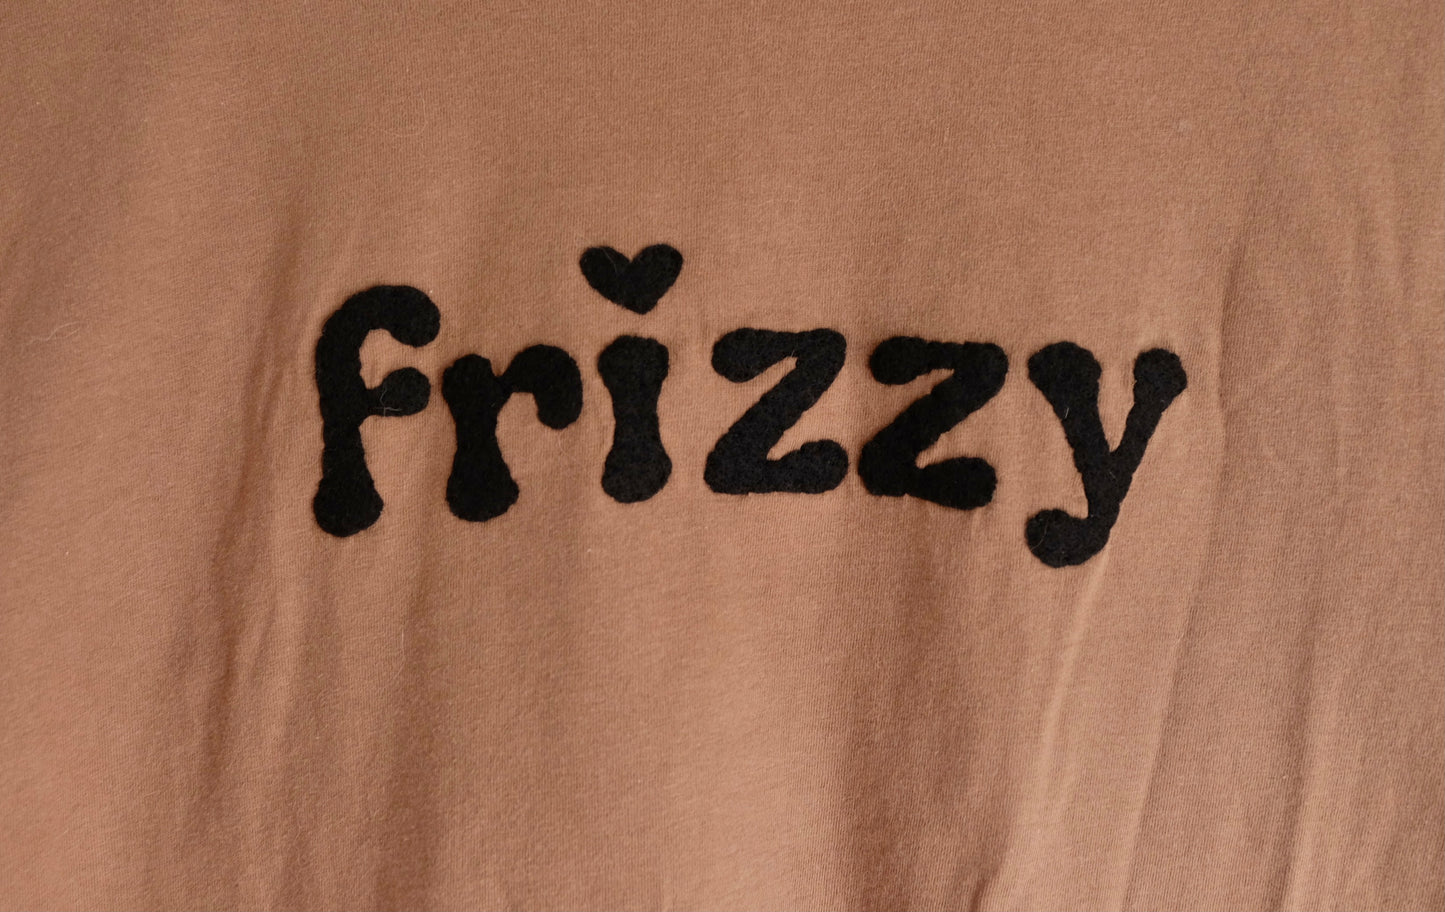 frizzy text tee